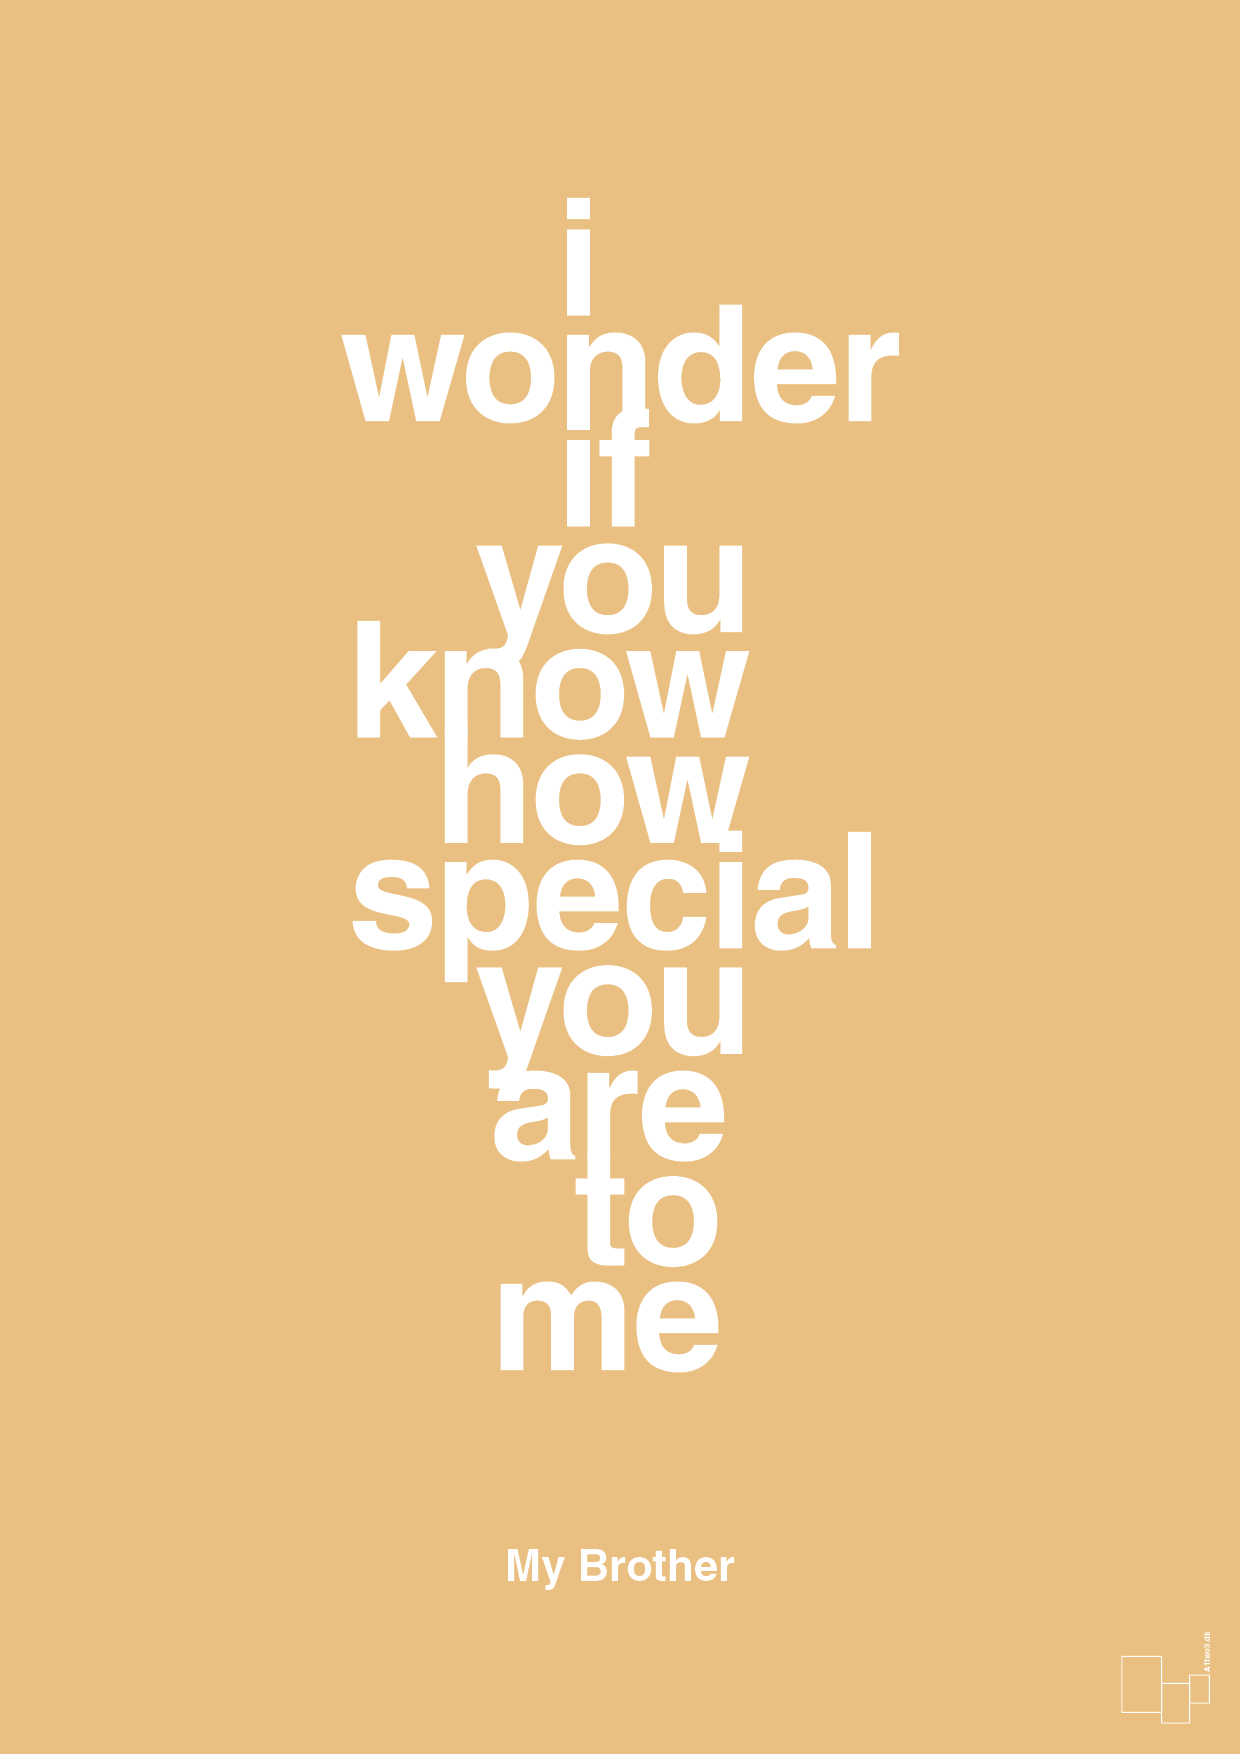 my brother - i wonder if you know how special you are to me - Plakat med Citater i Charismatic